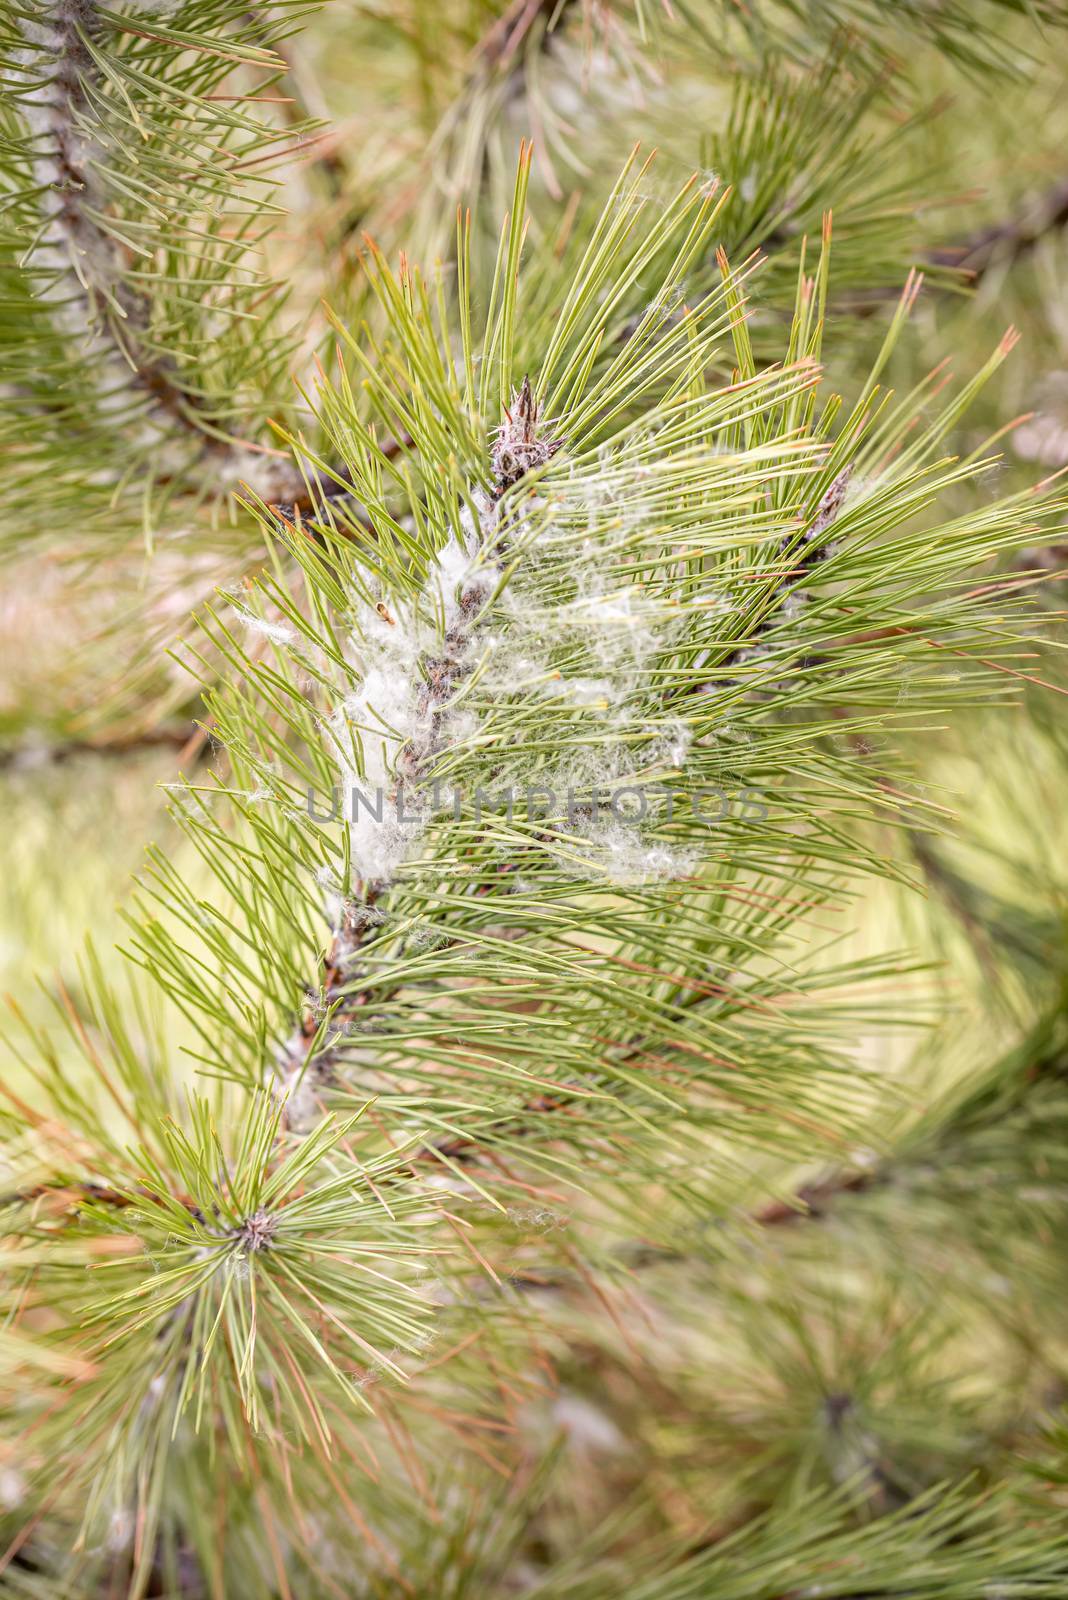 Poplar seeds trapped in pine needles by MaxalTamor